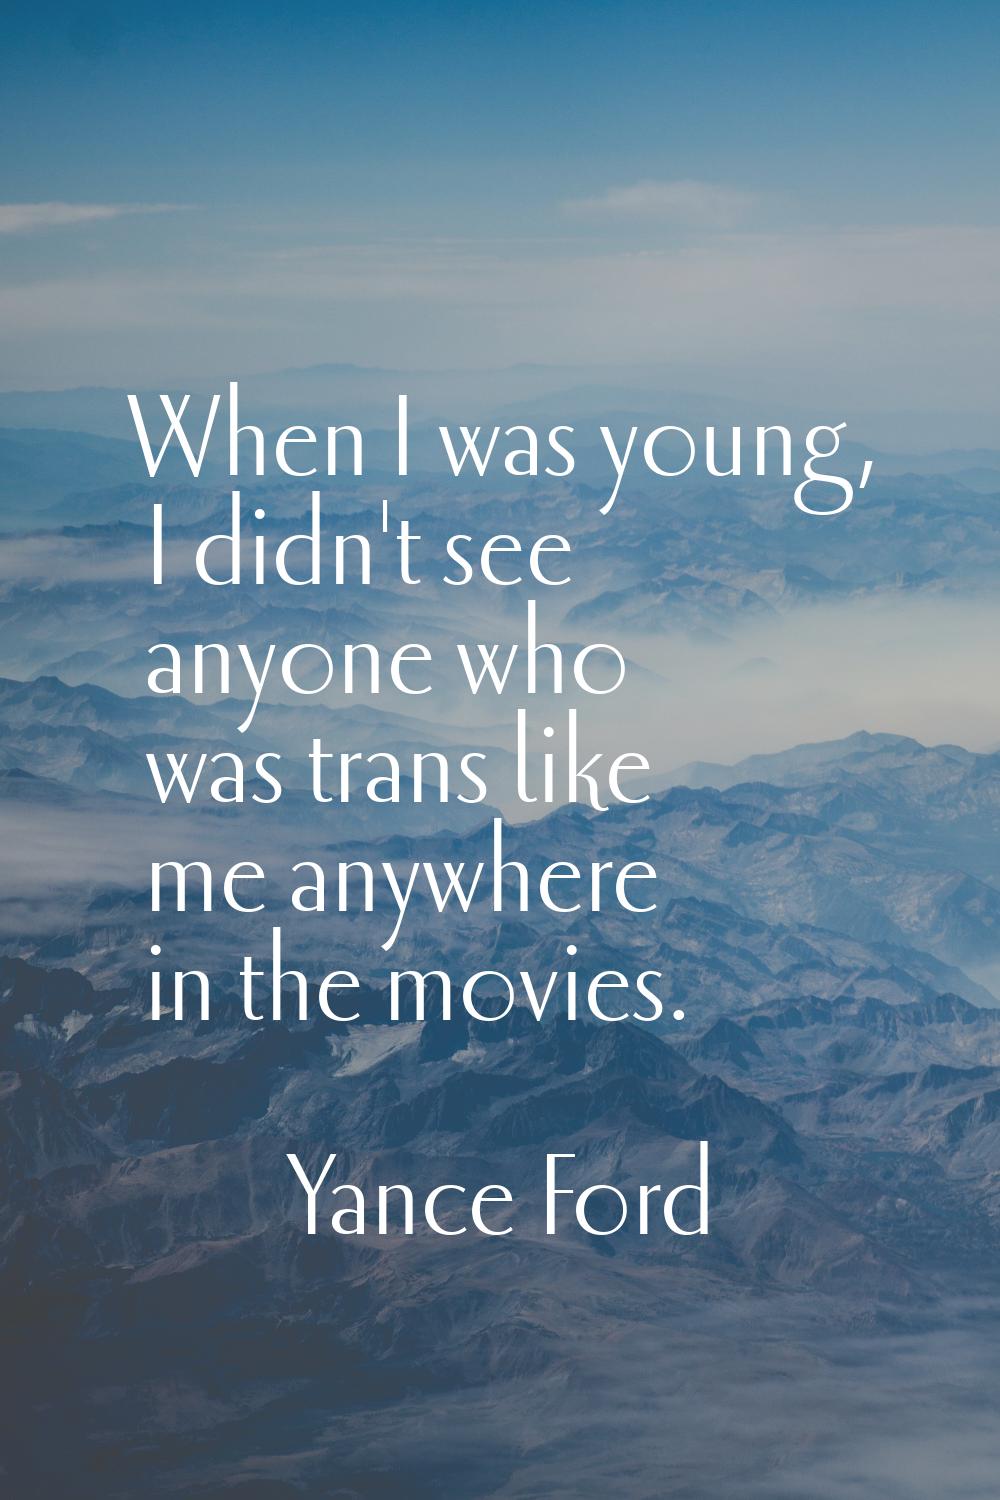 When I was young, I didn't see anyone who was trans like me anywhere in the movies.